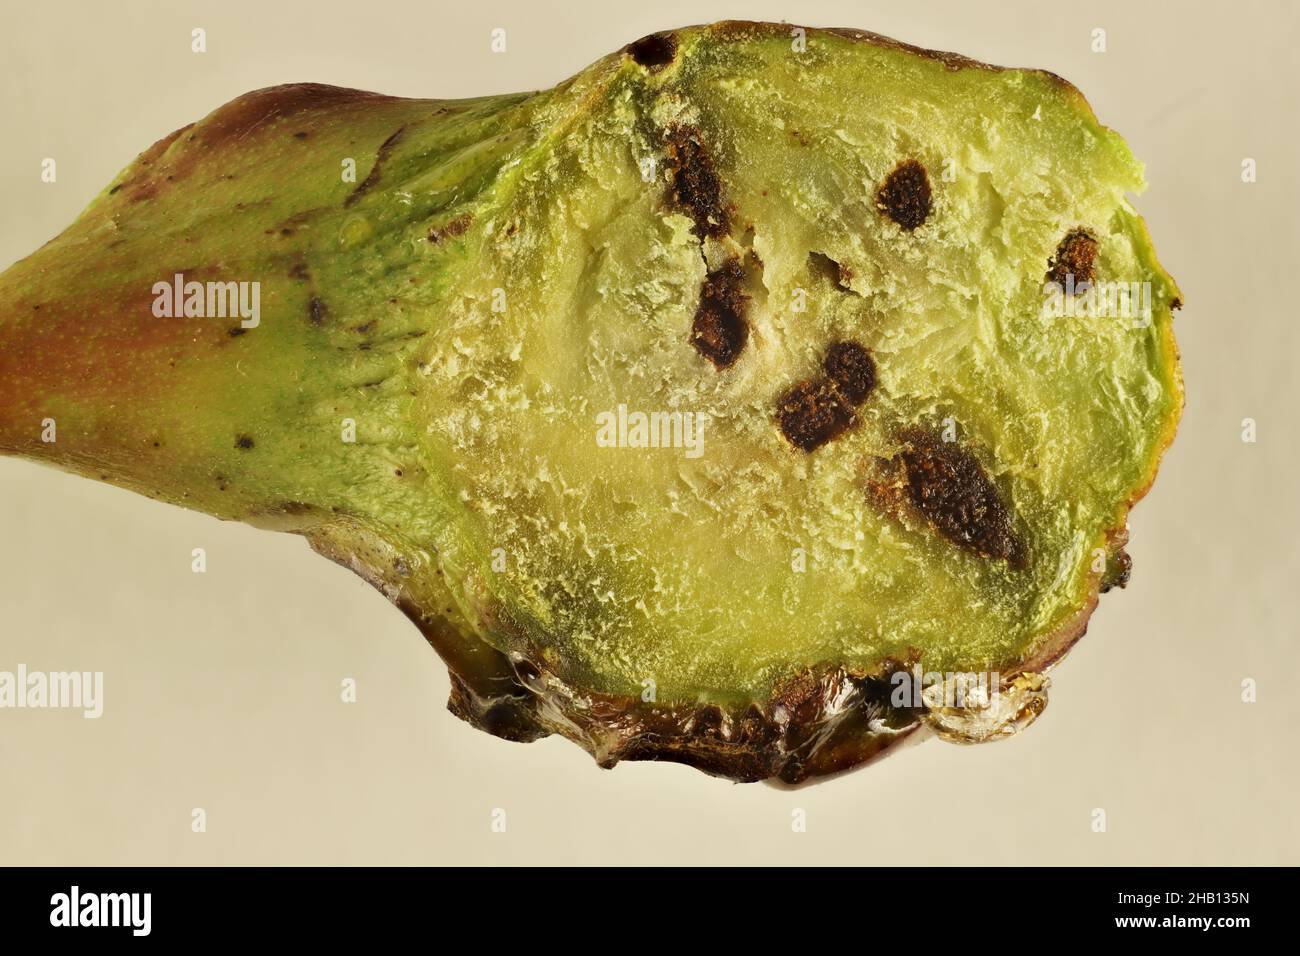 Macro cross-section of gall formed by larvae of Bud-galling Wasp (Trichilogaster signiventris) on Golden Wattle, South Australia Stock Photo